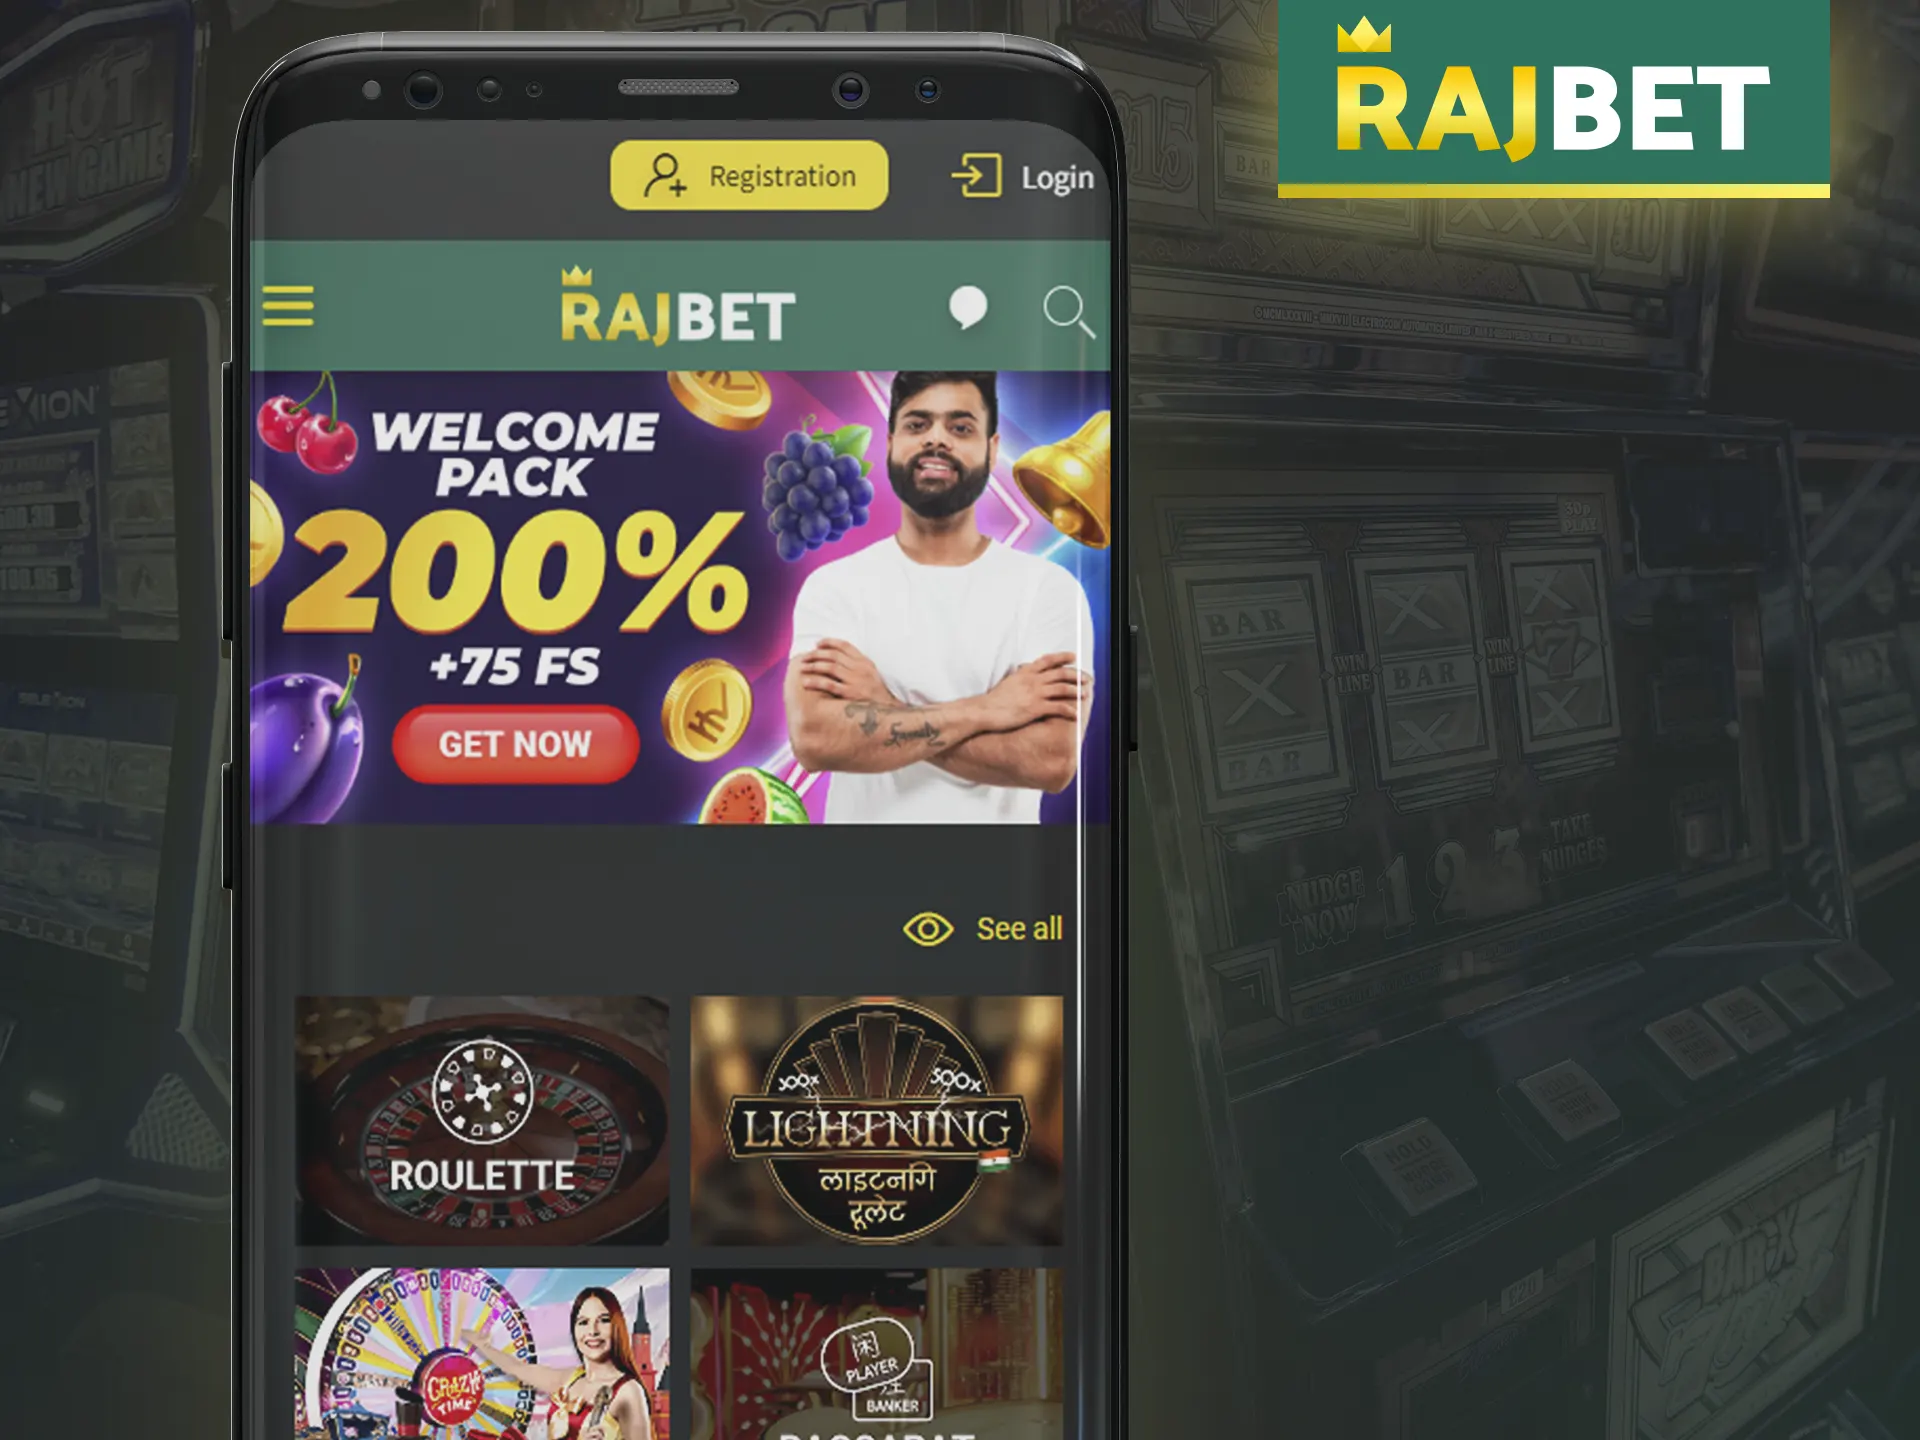 Go to the Rajbet website in the browser on your mobile device and play online casino.